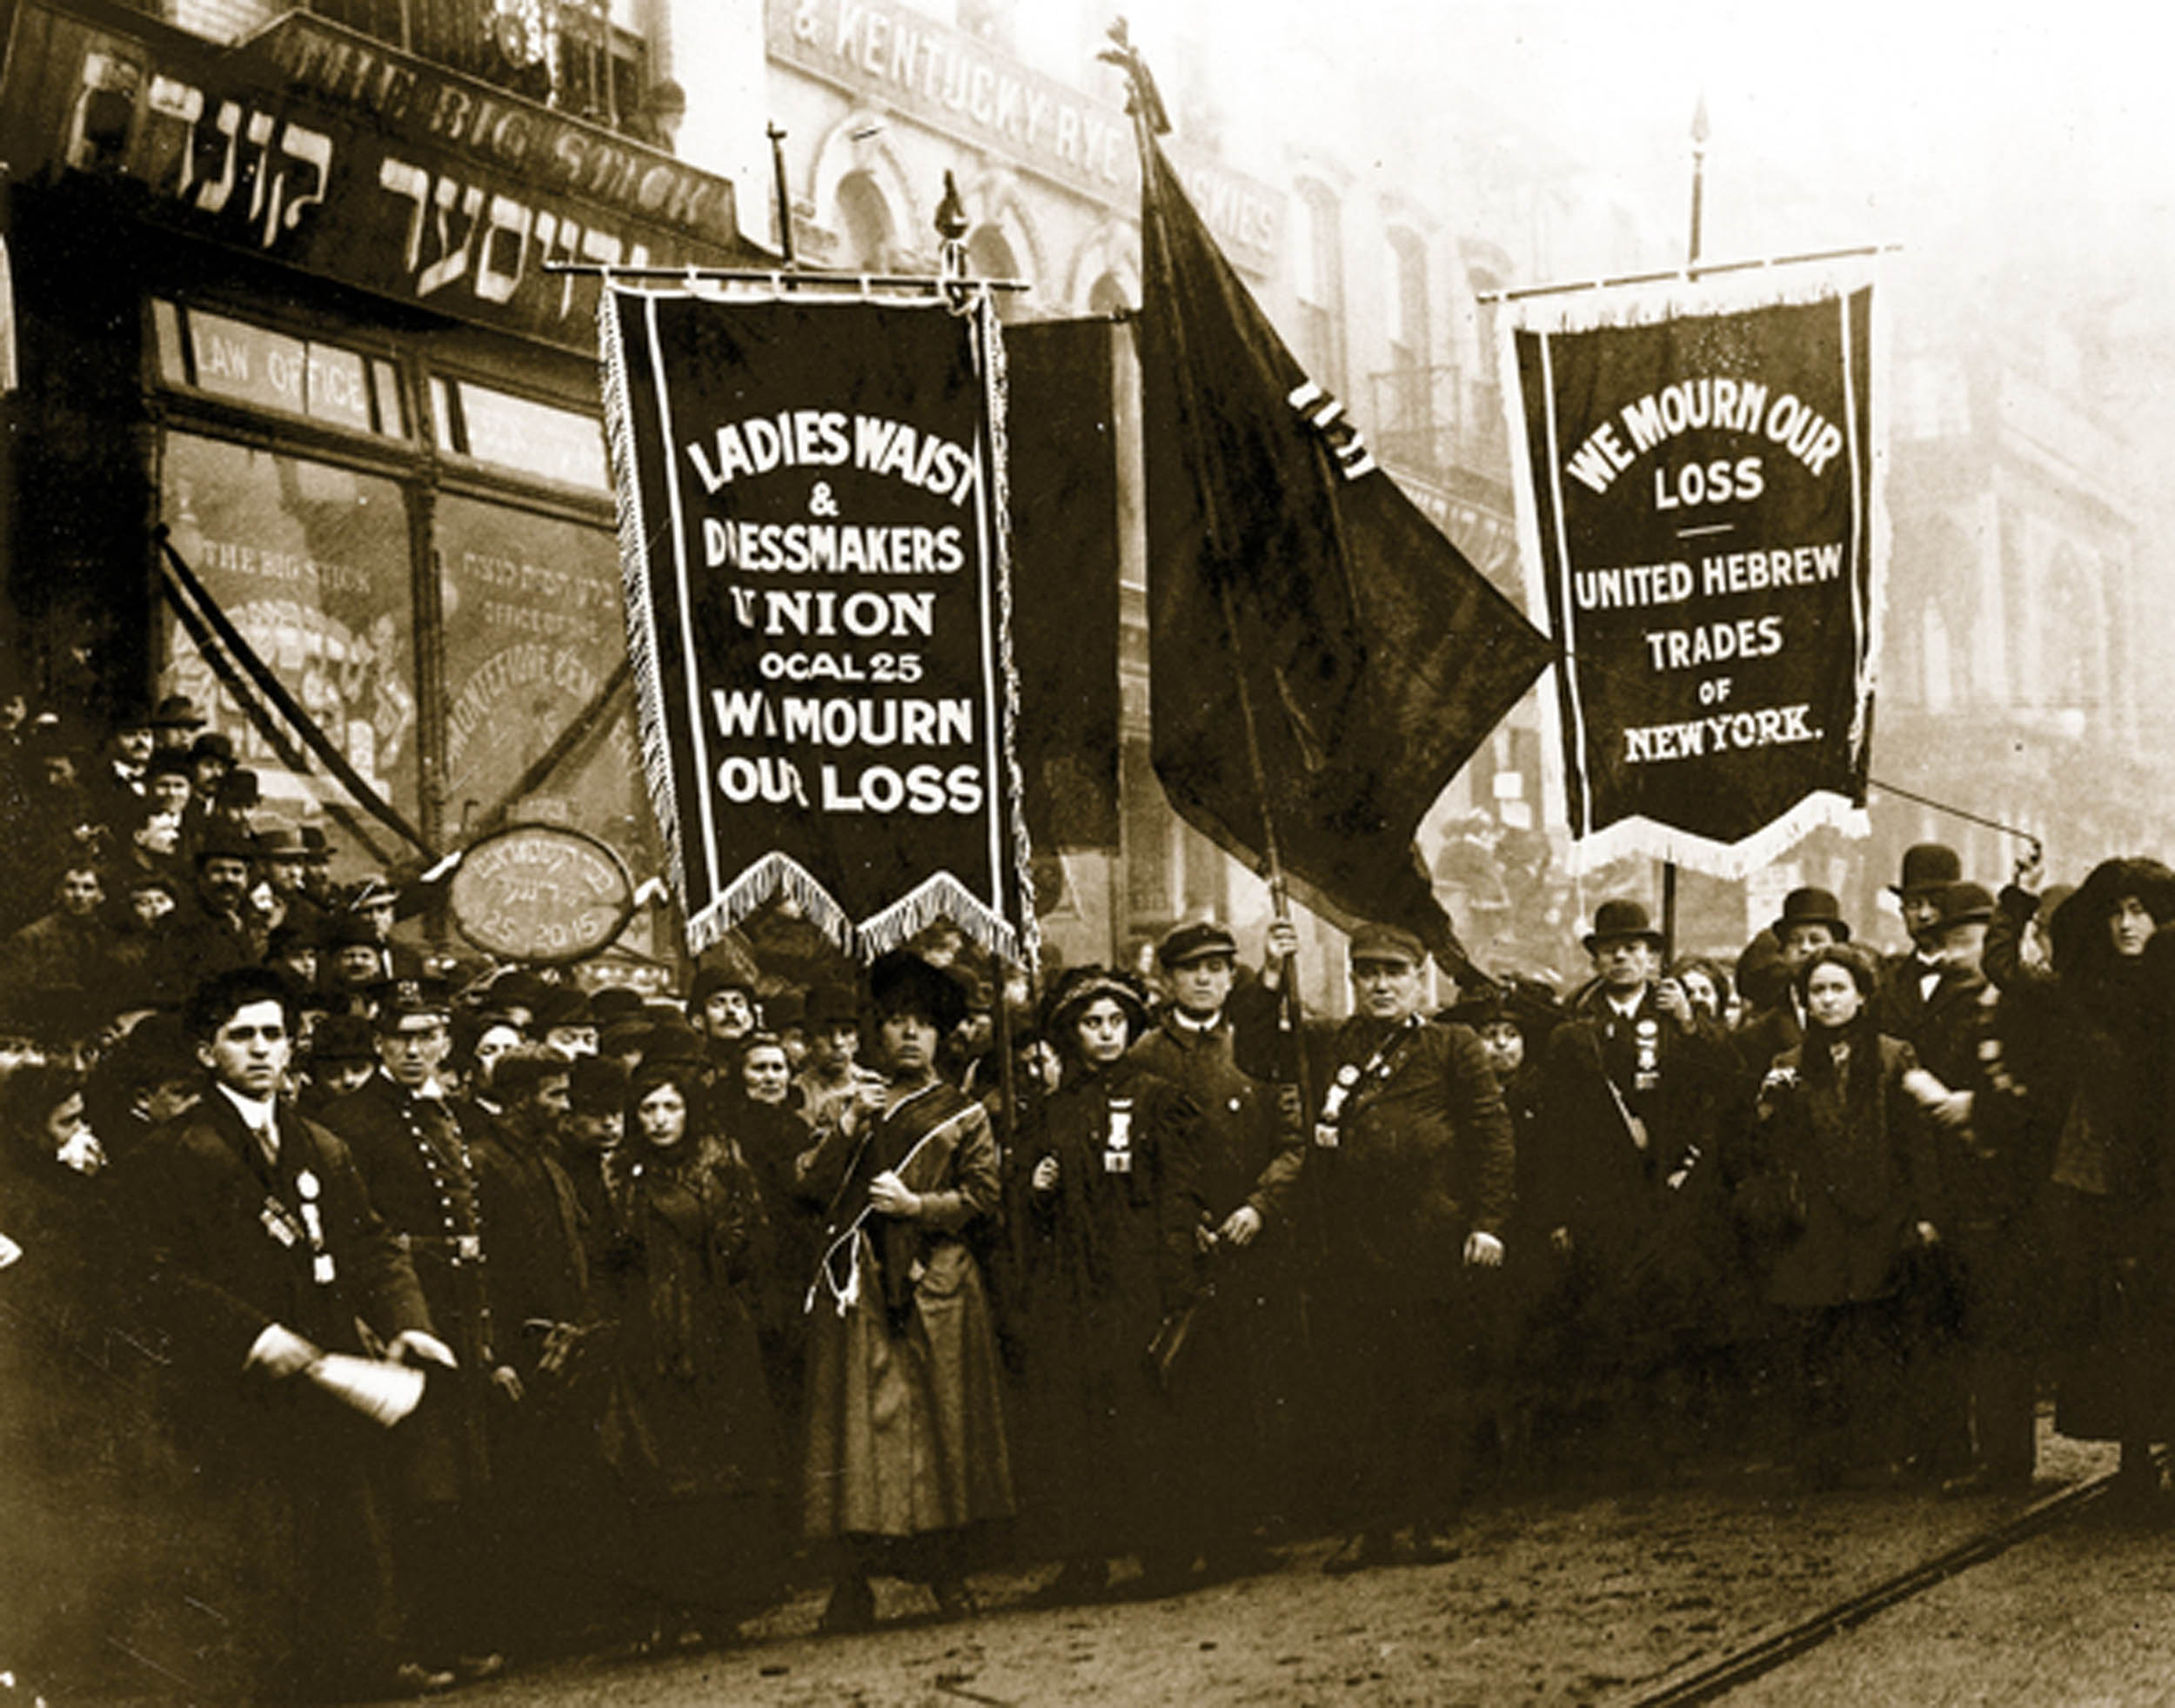 Union members mourned for the victims after the Triangle Shirtwaist Factory Fire of March 1911.